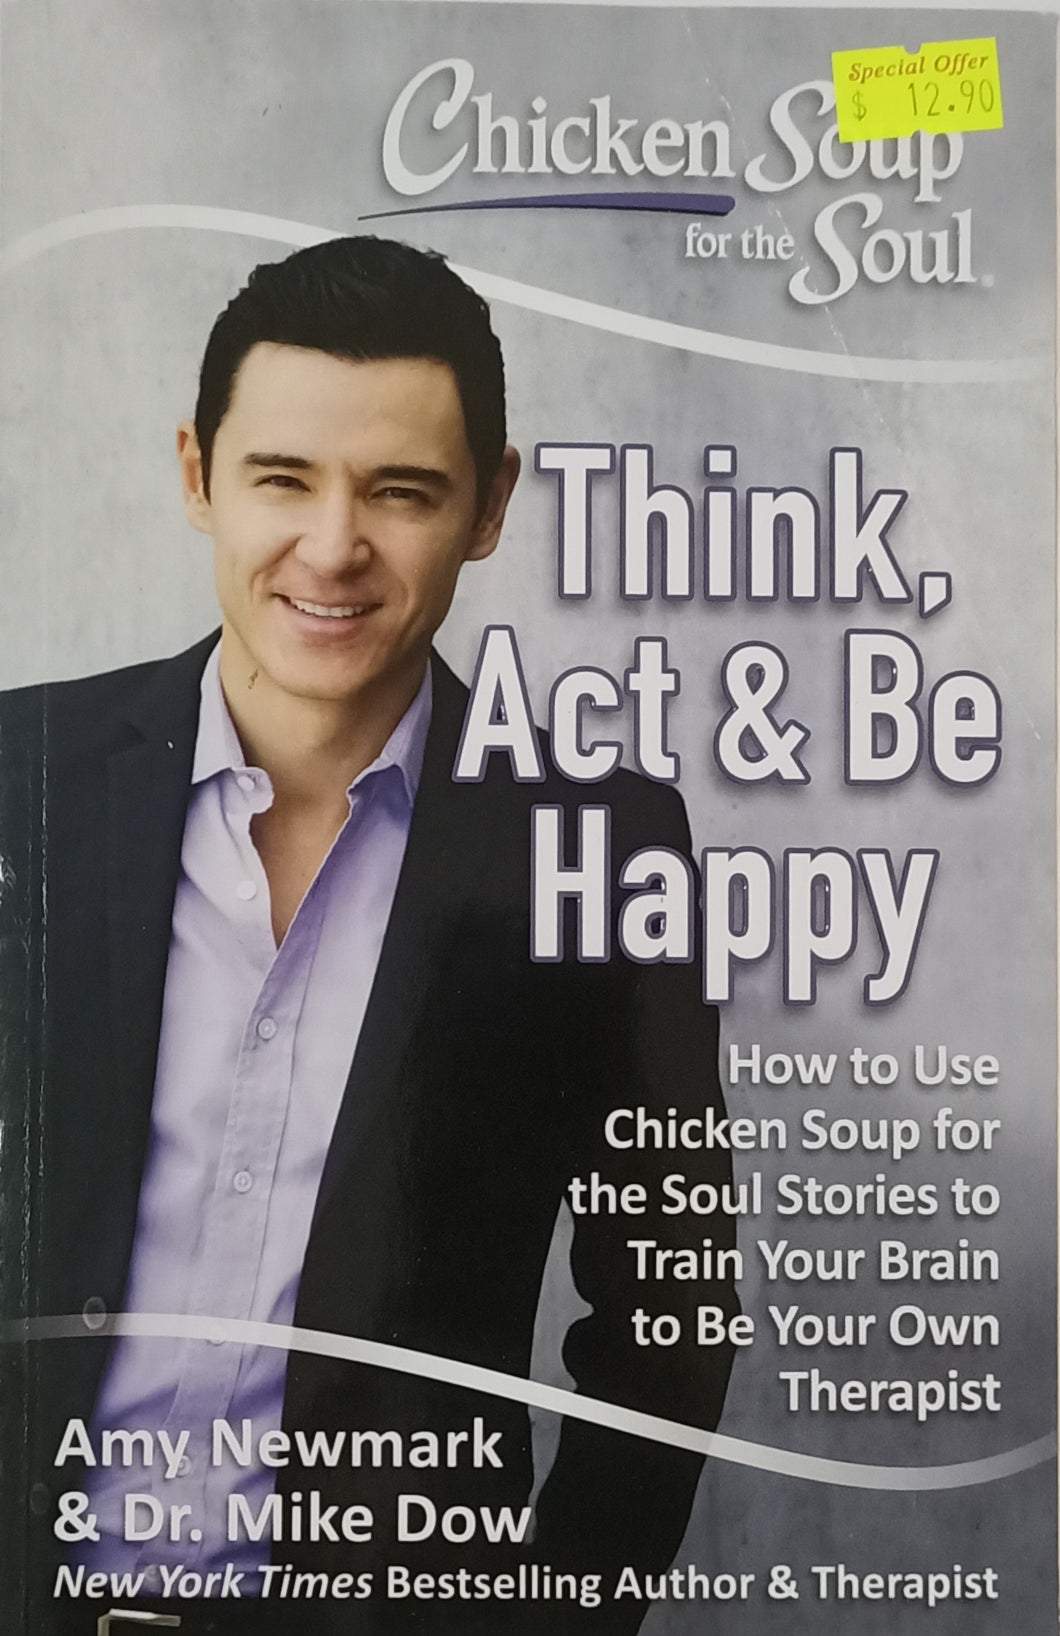 Chicken Soup for the Soul: Think, Act & Be Happy - Amy Newmark & Dr. Mike Dow